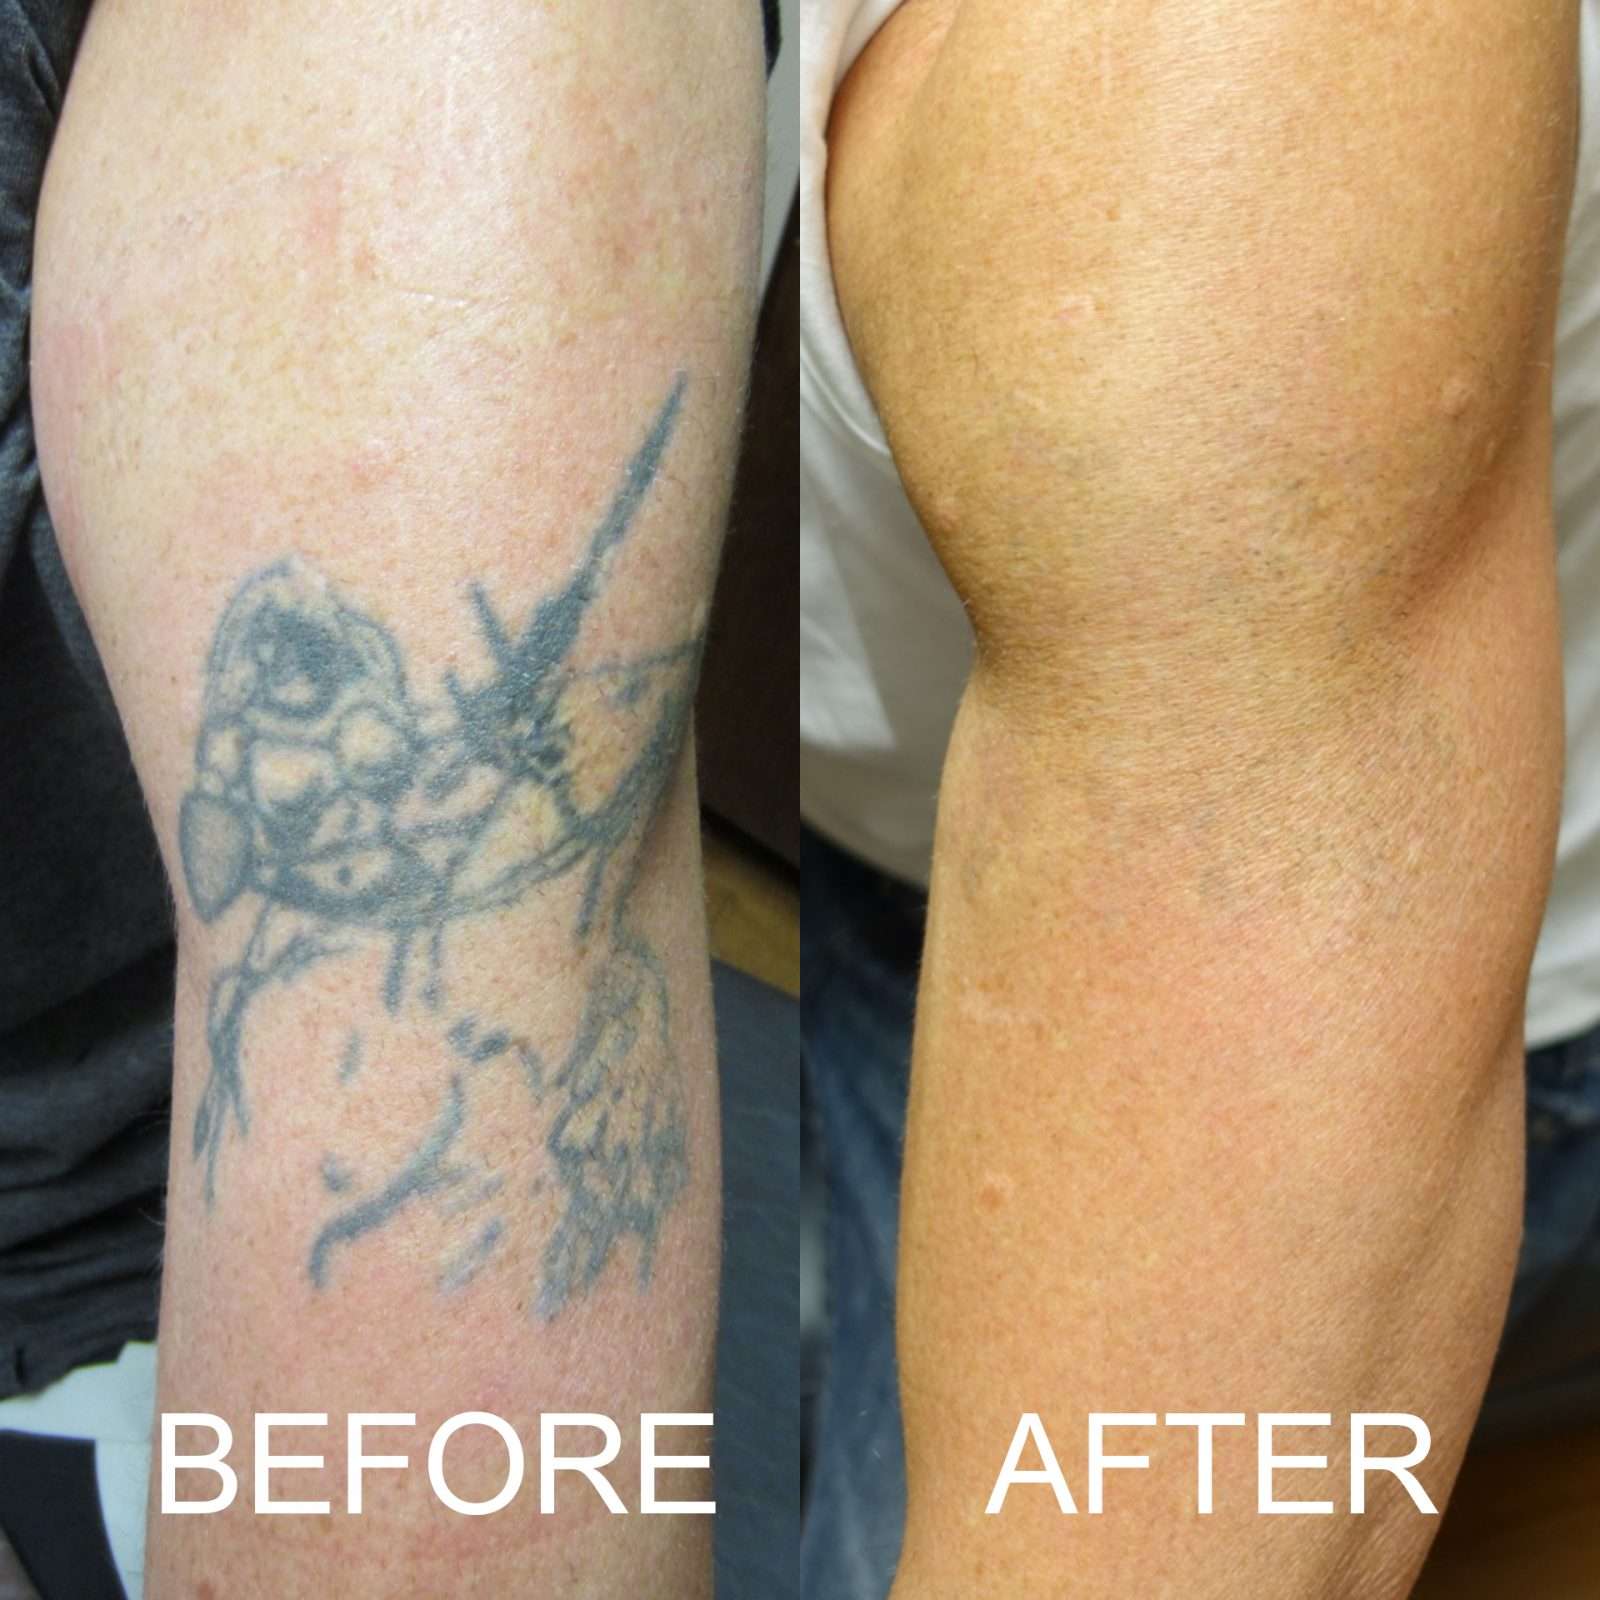 Tattoo Removal: Before/After Before and After Photos